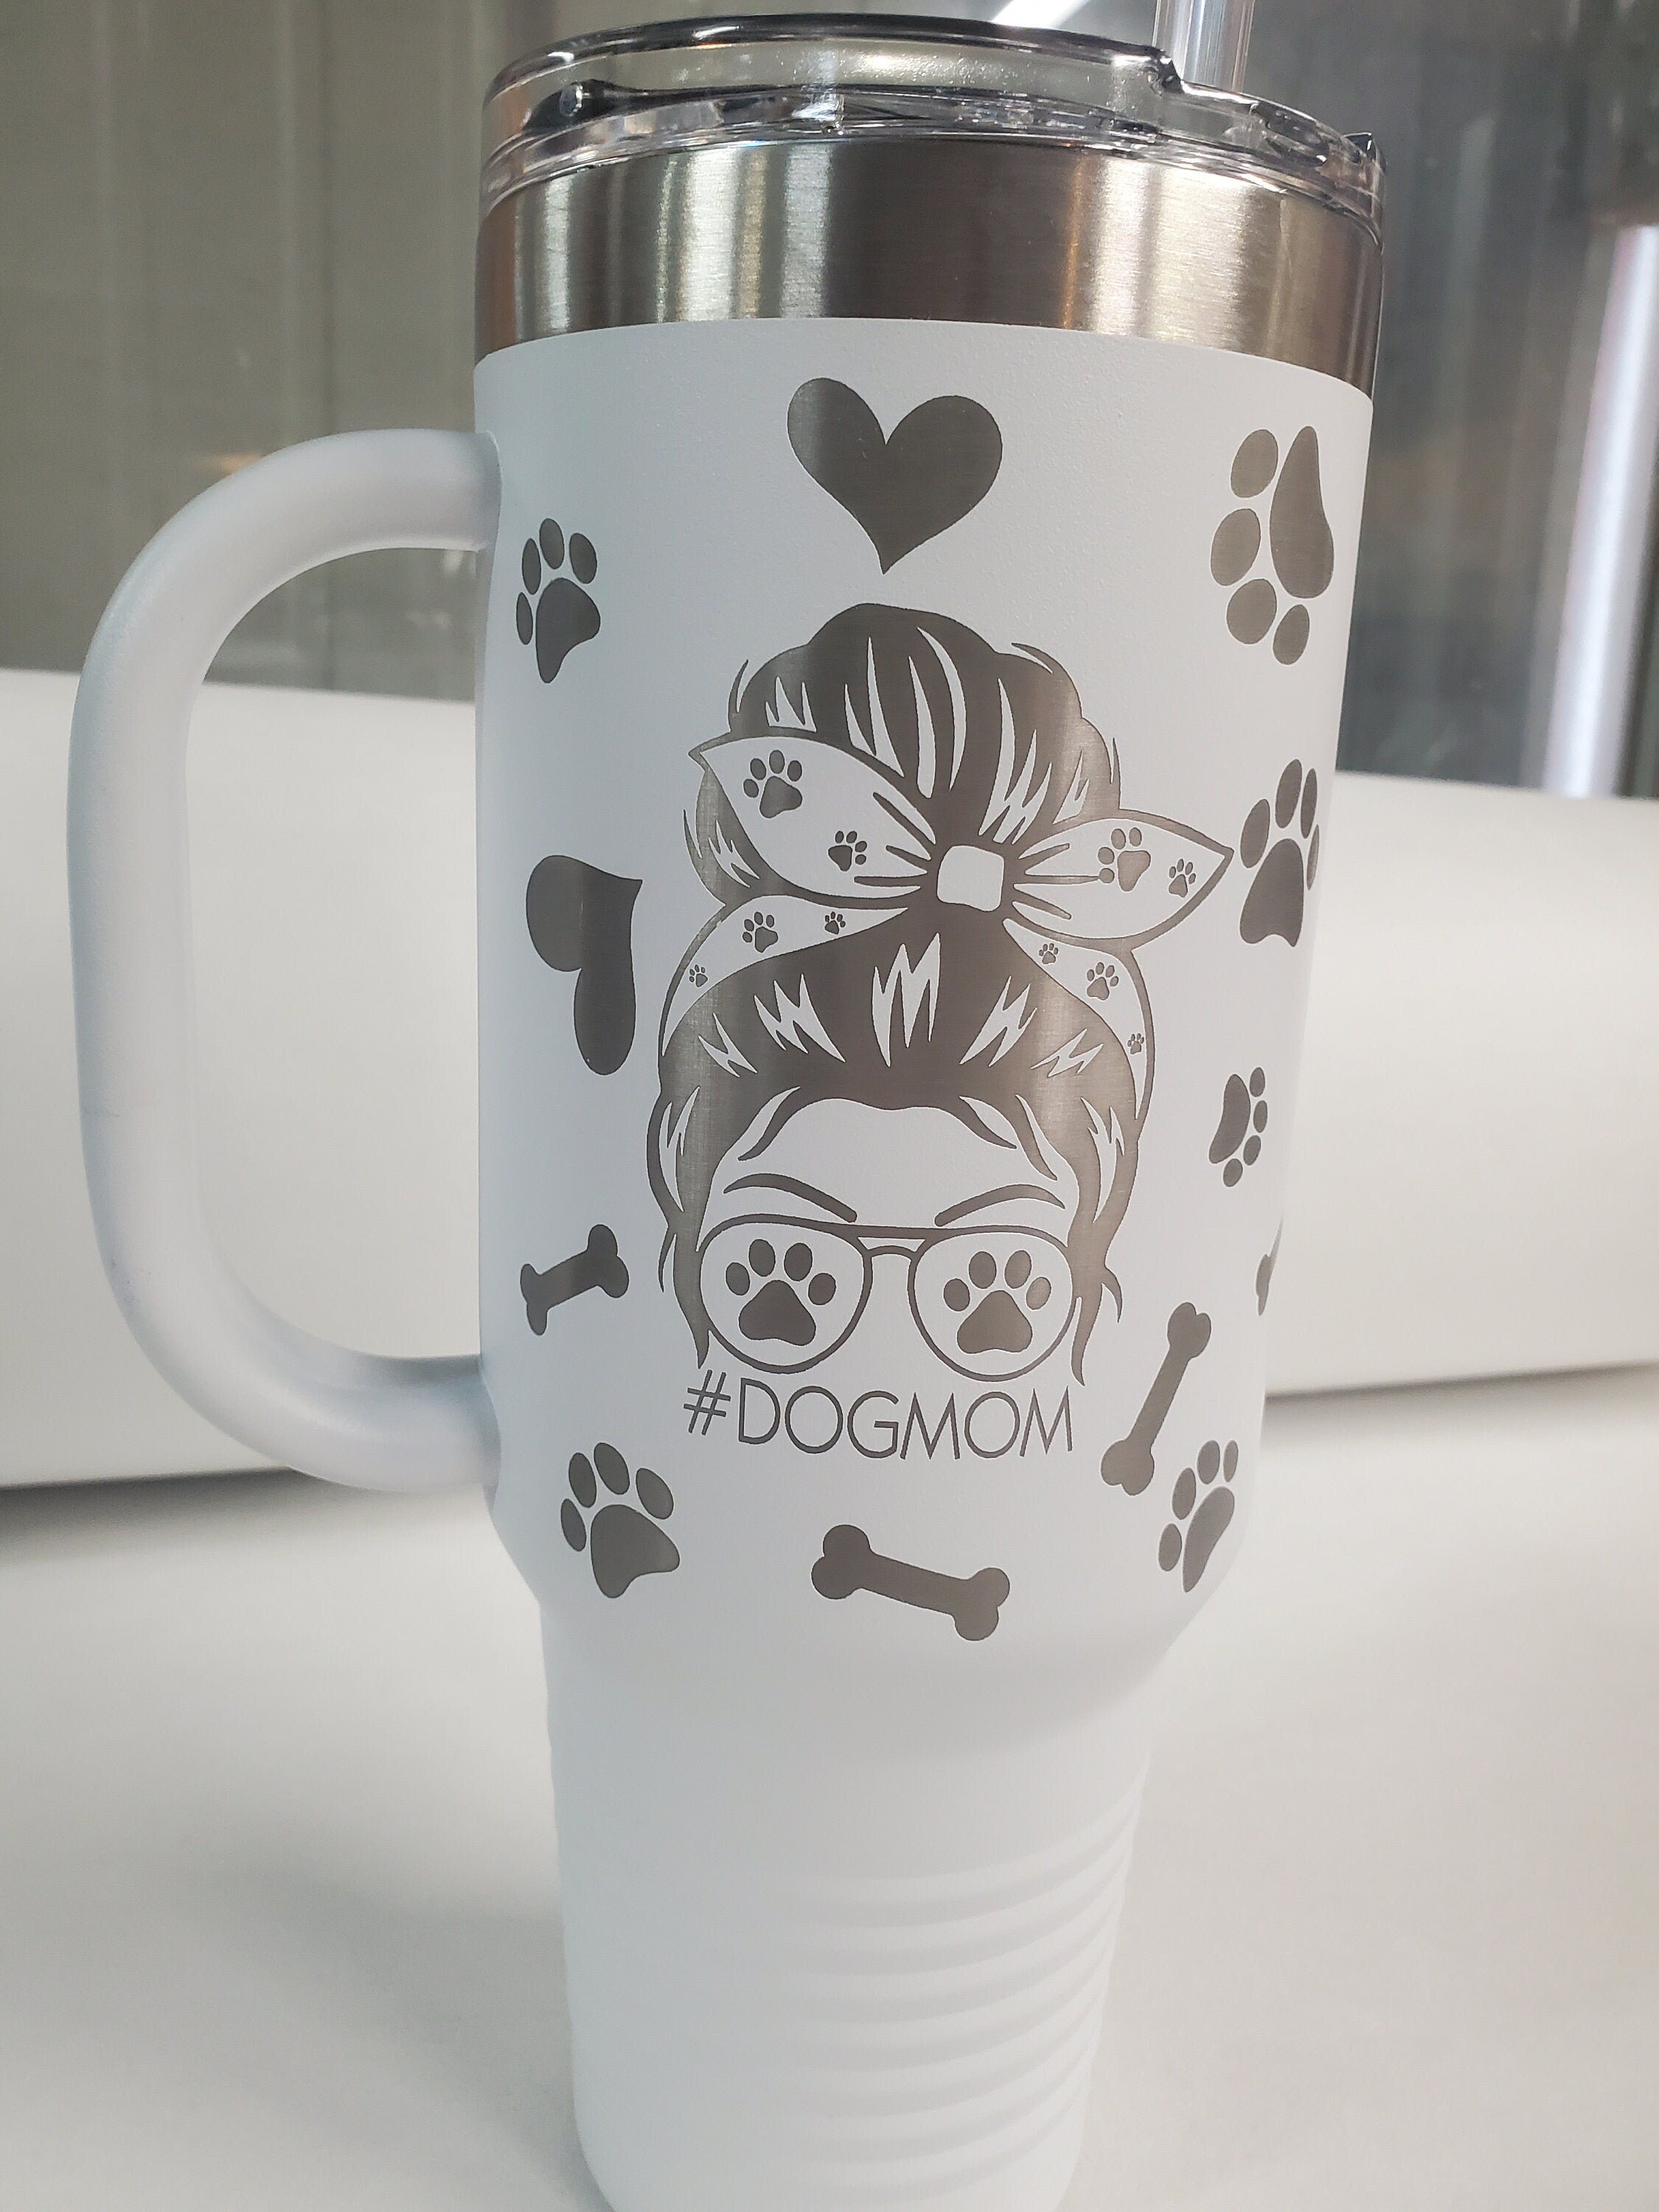 40 oz Handle tumbler, All I Need Is Coffee and my Dog, dog mom, 40 oz Cup, Laser Engraved custom, Valentines gift, mother day gift, coffee